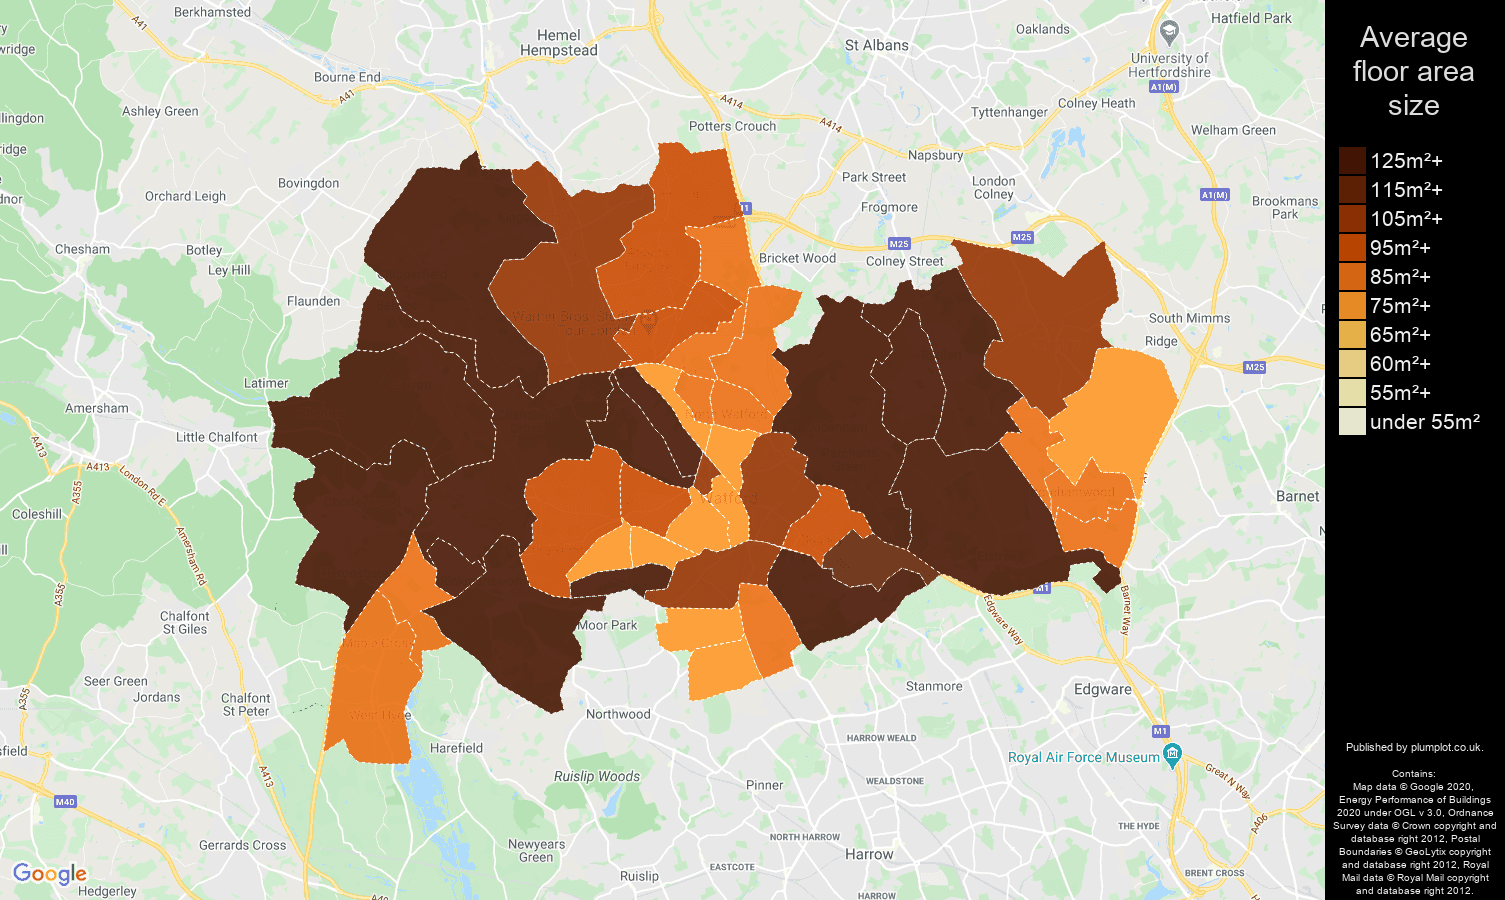 Watford map of average floor area size of houses